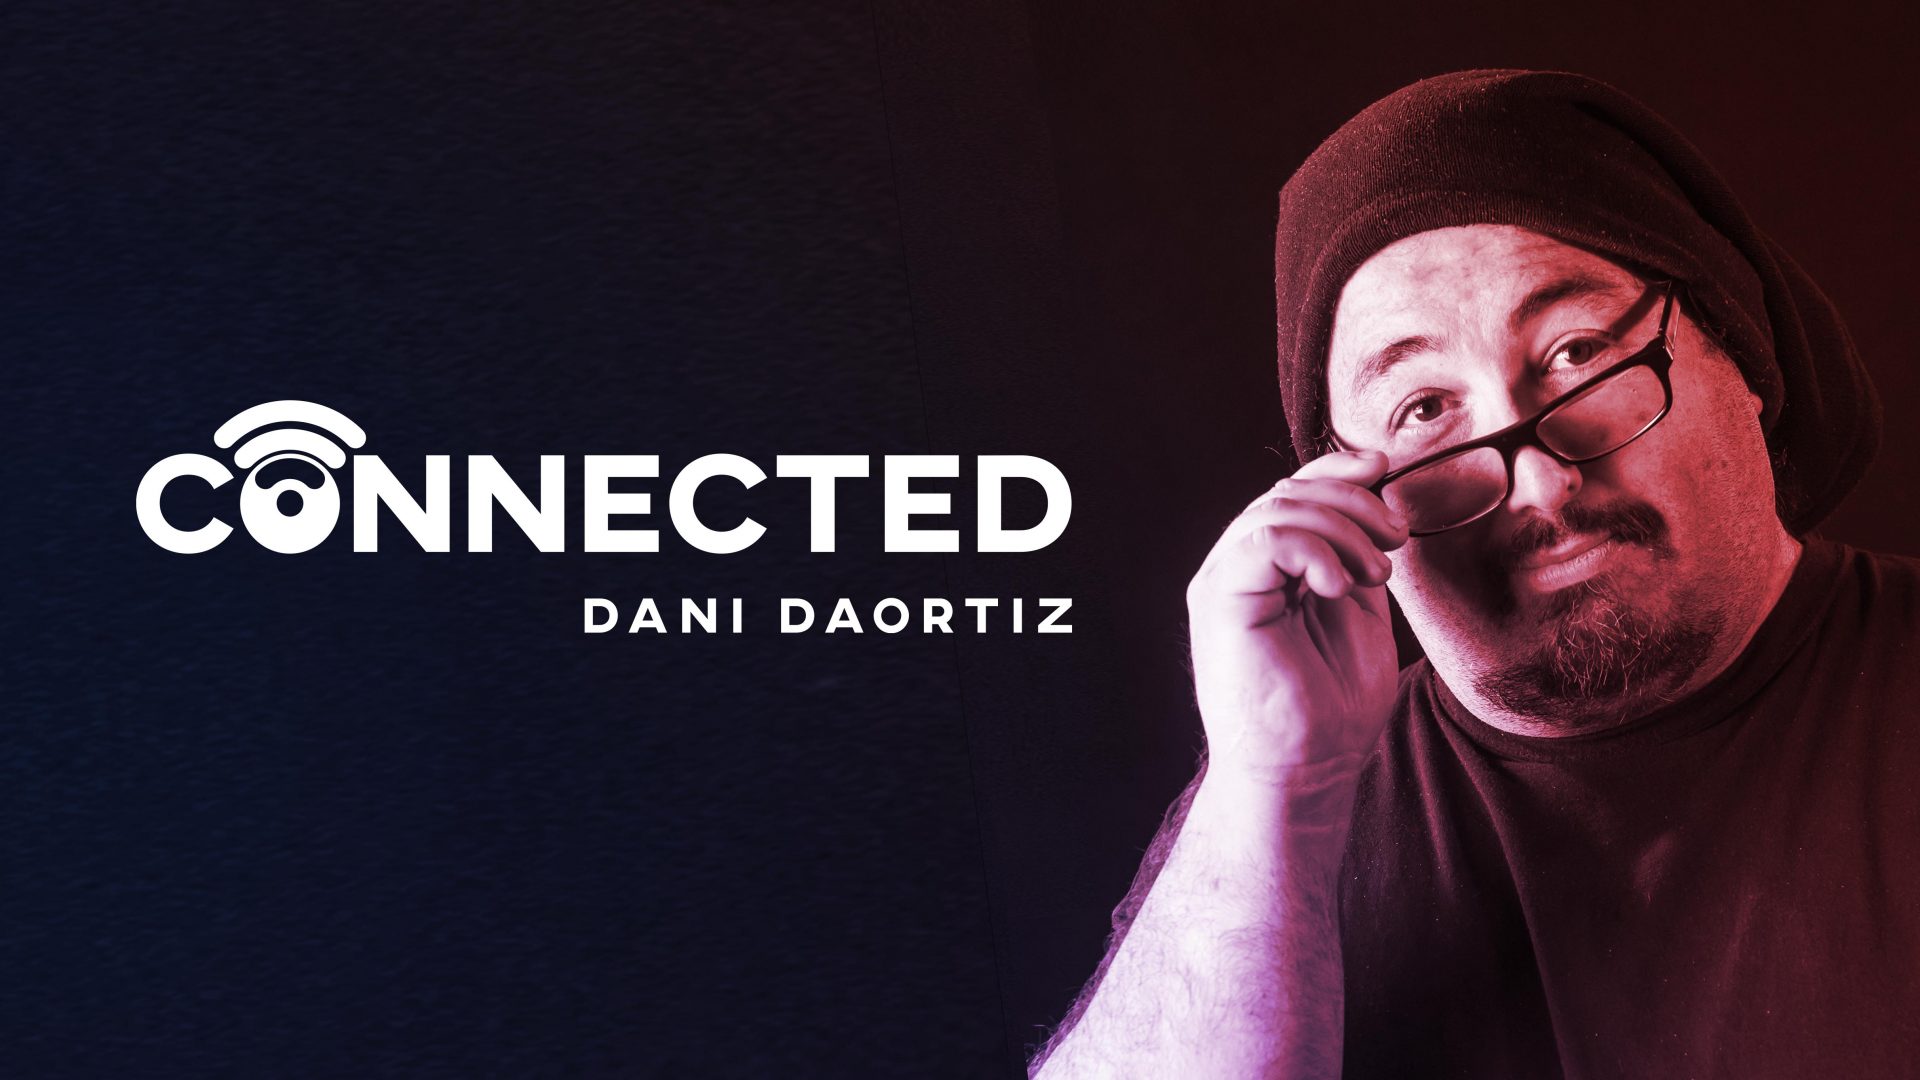 Connected by Dani DaOrtiz (MP4 Video Download HD Quality)